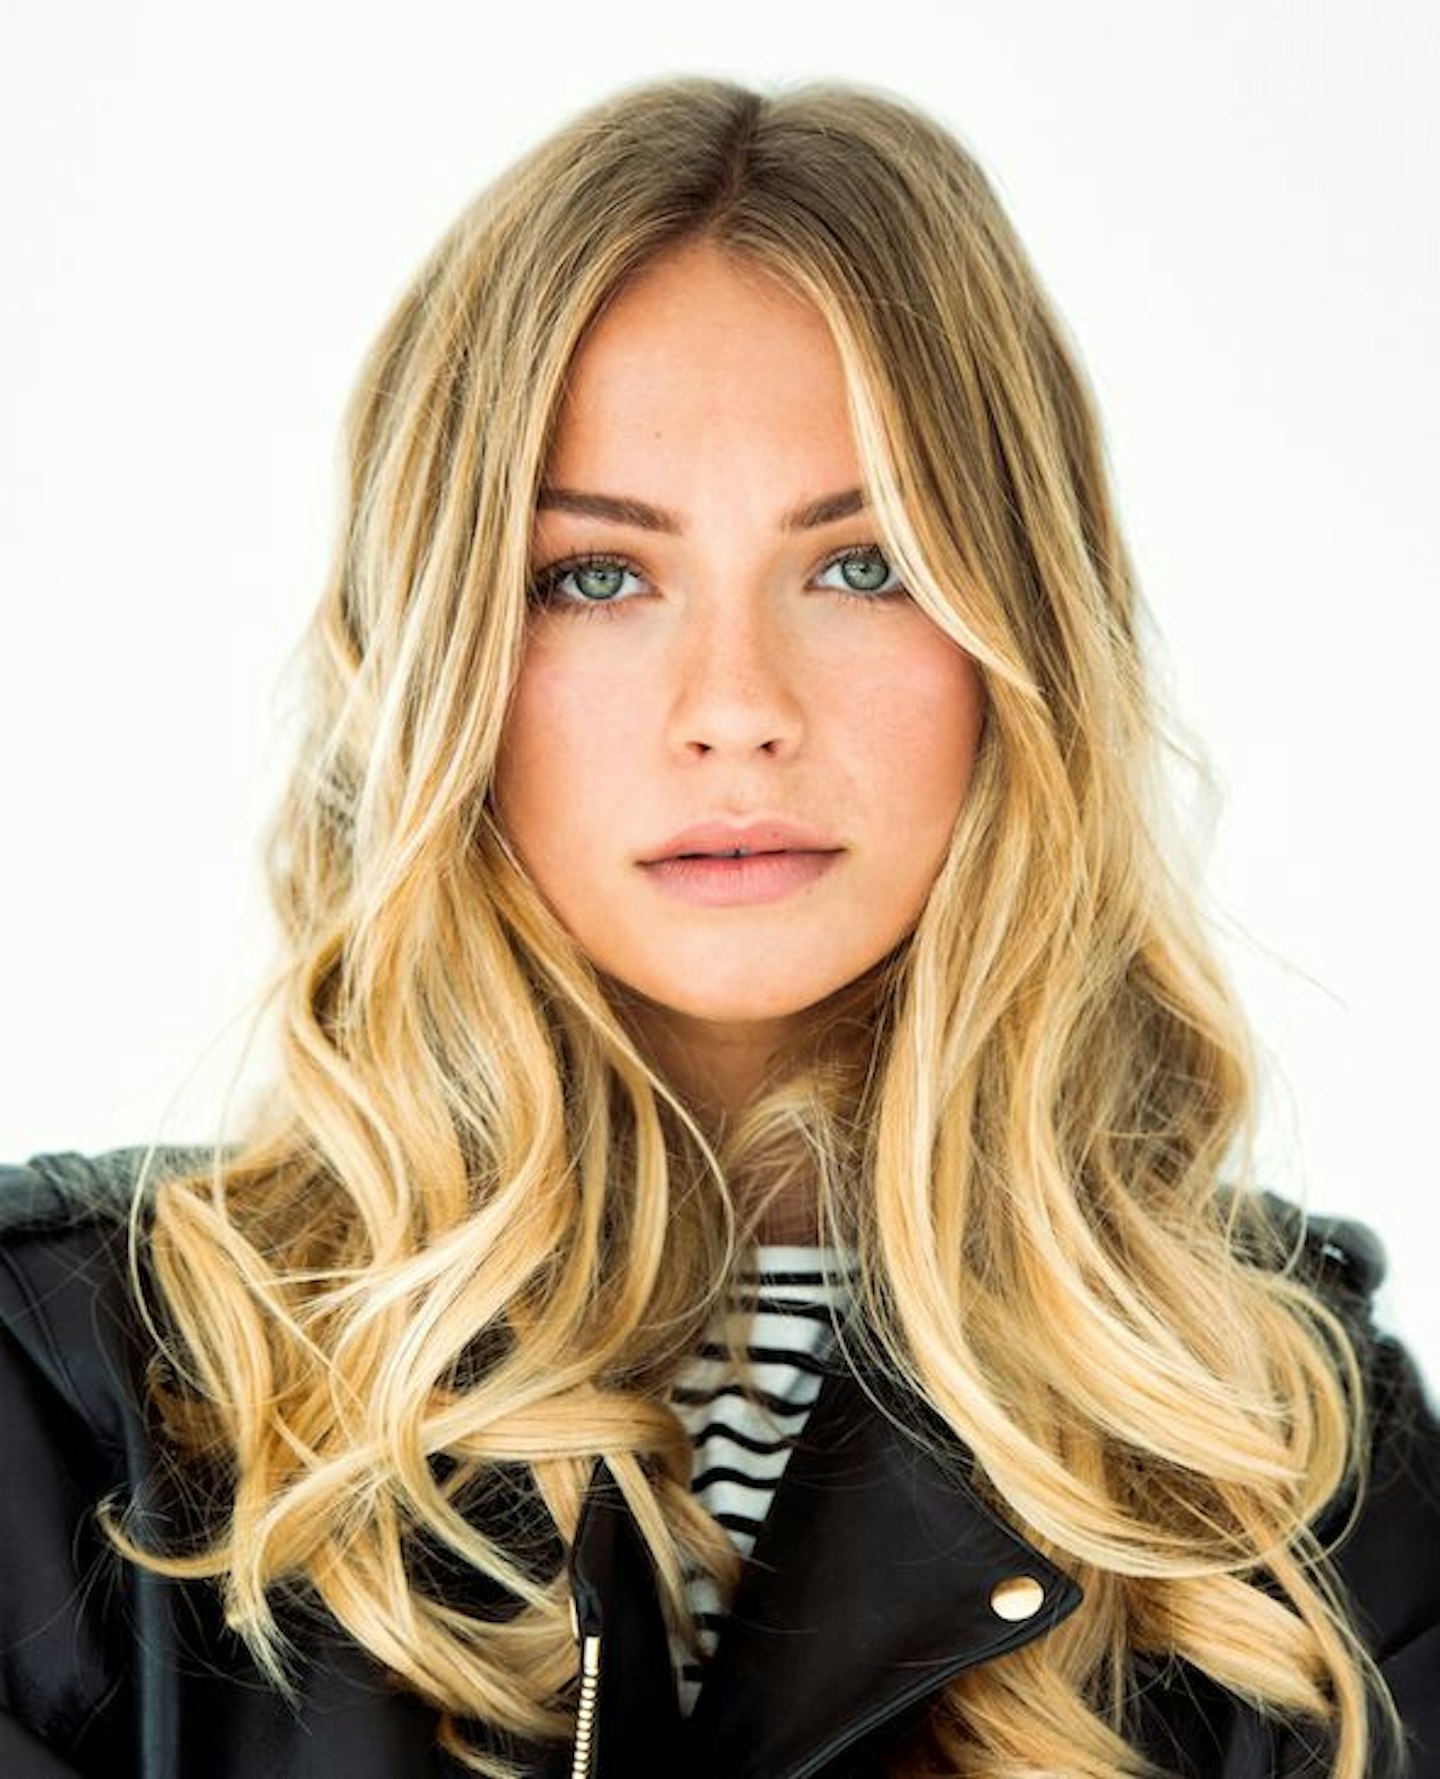 The Best Hairdressers For Balayage Colour In London